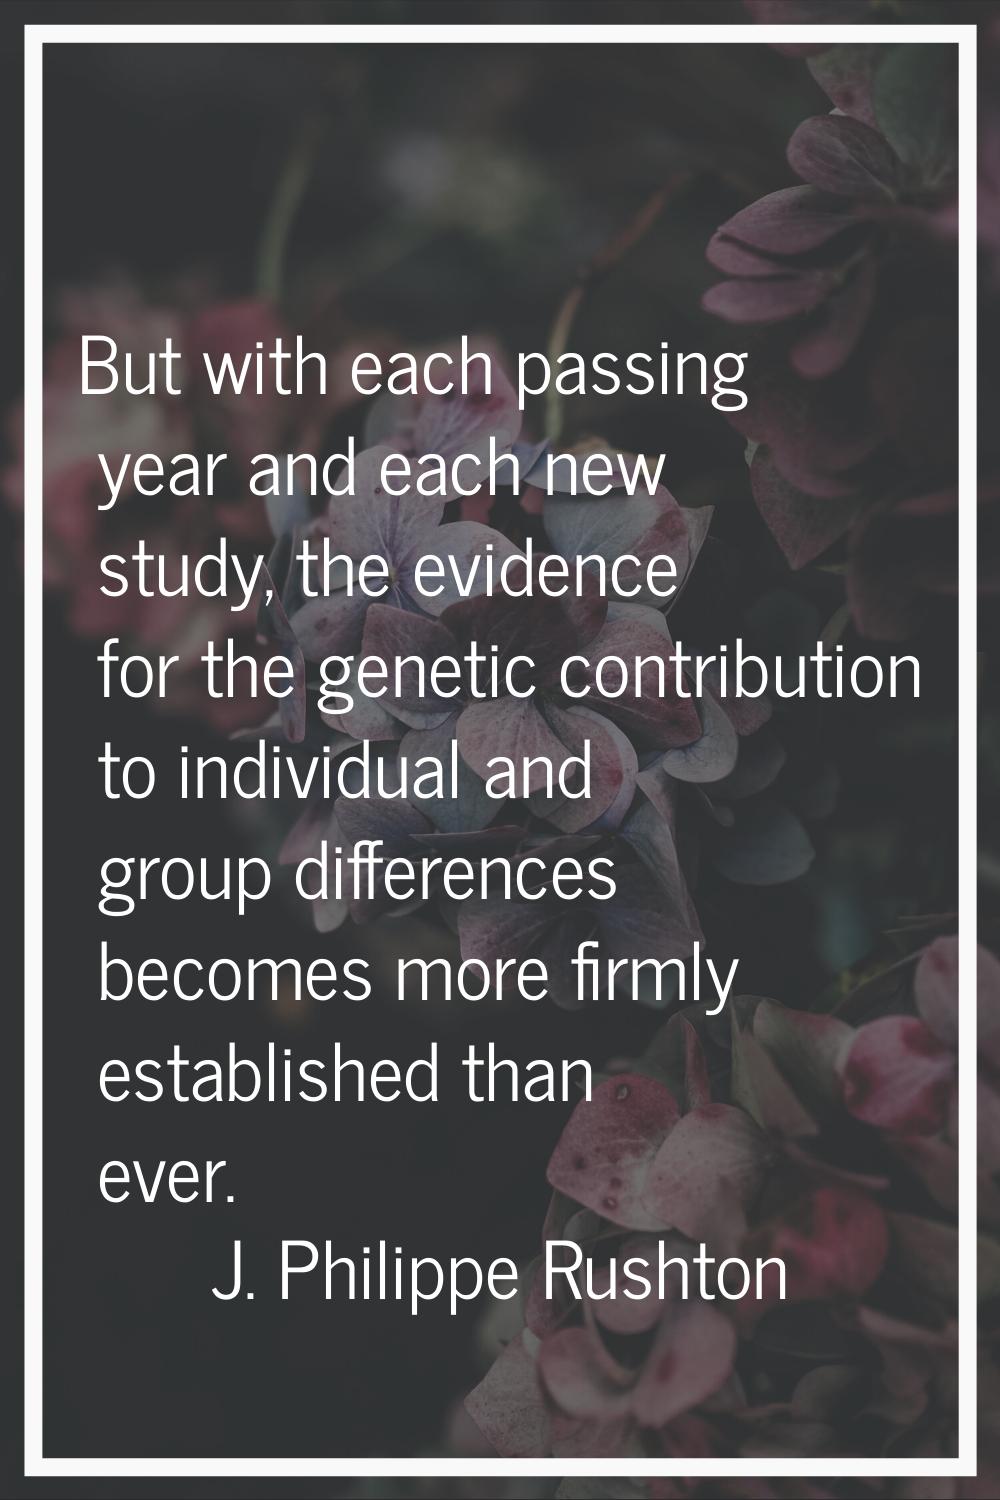 But with each passing year and each new study, the evidence for the genetic contribution to individ